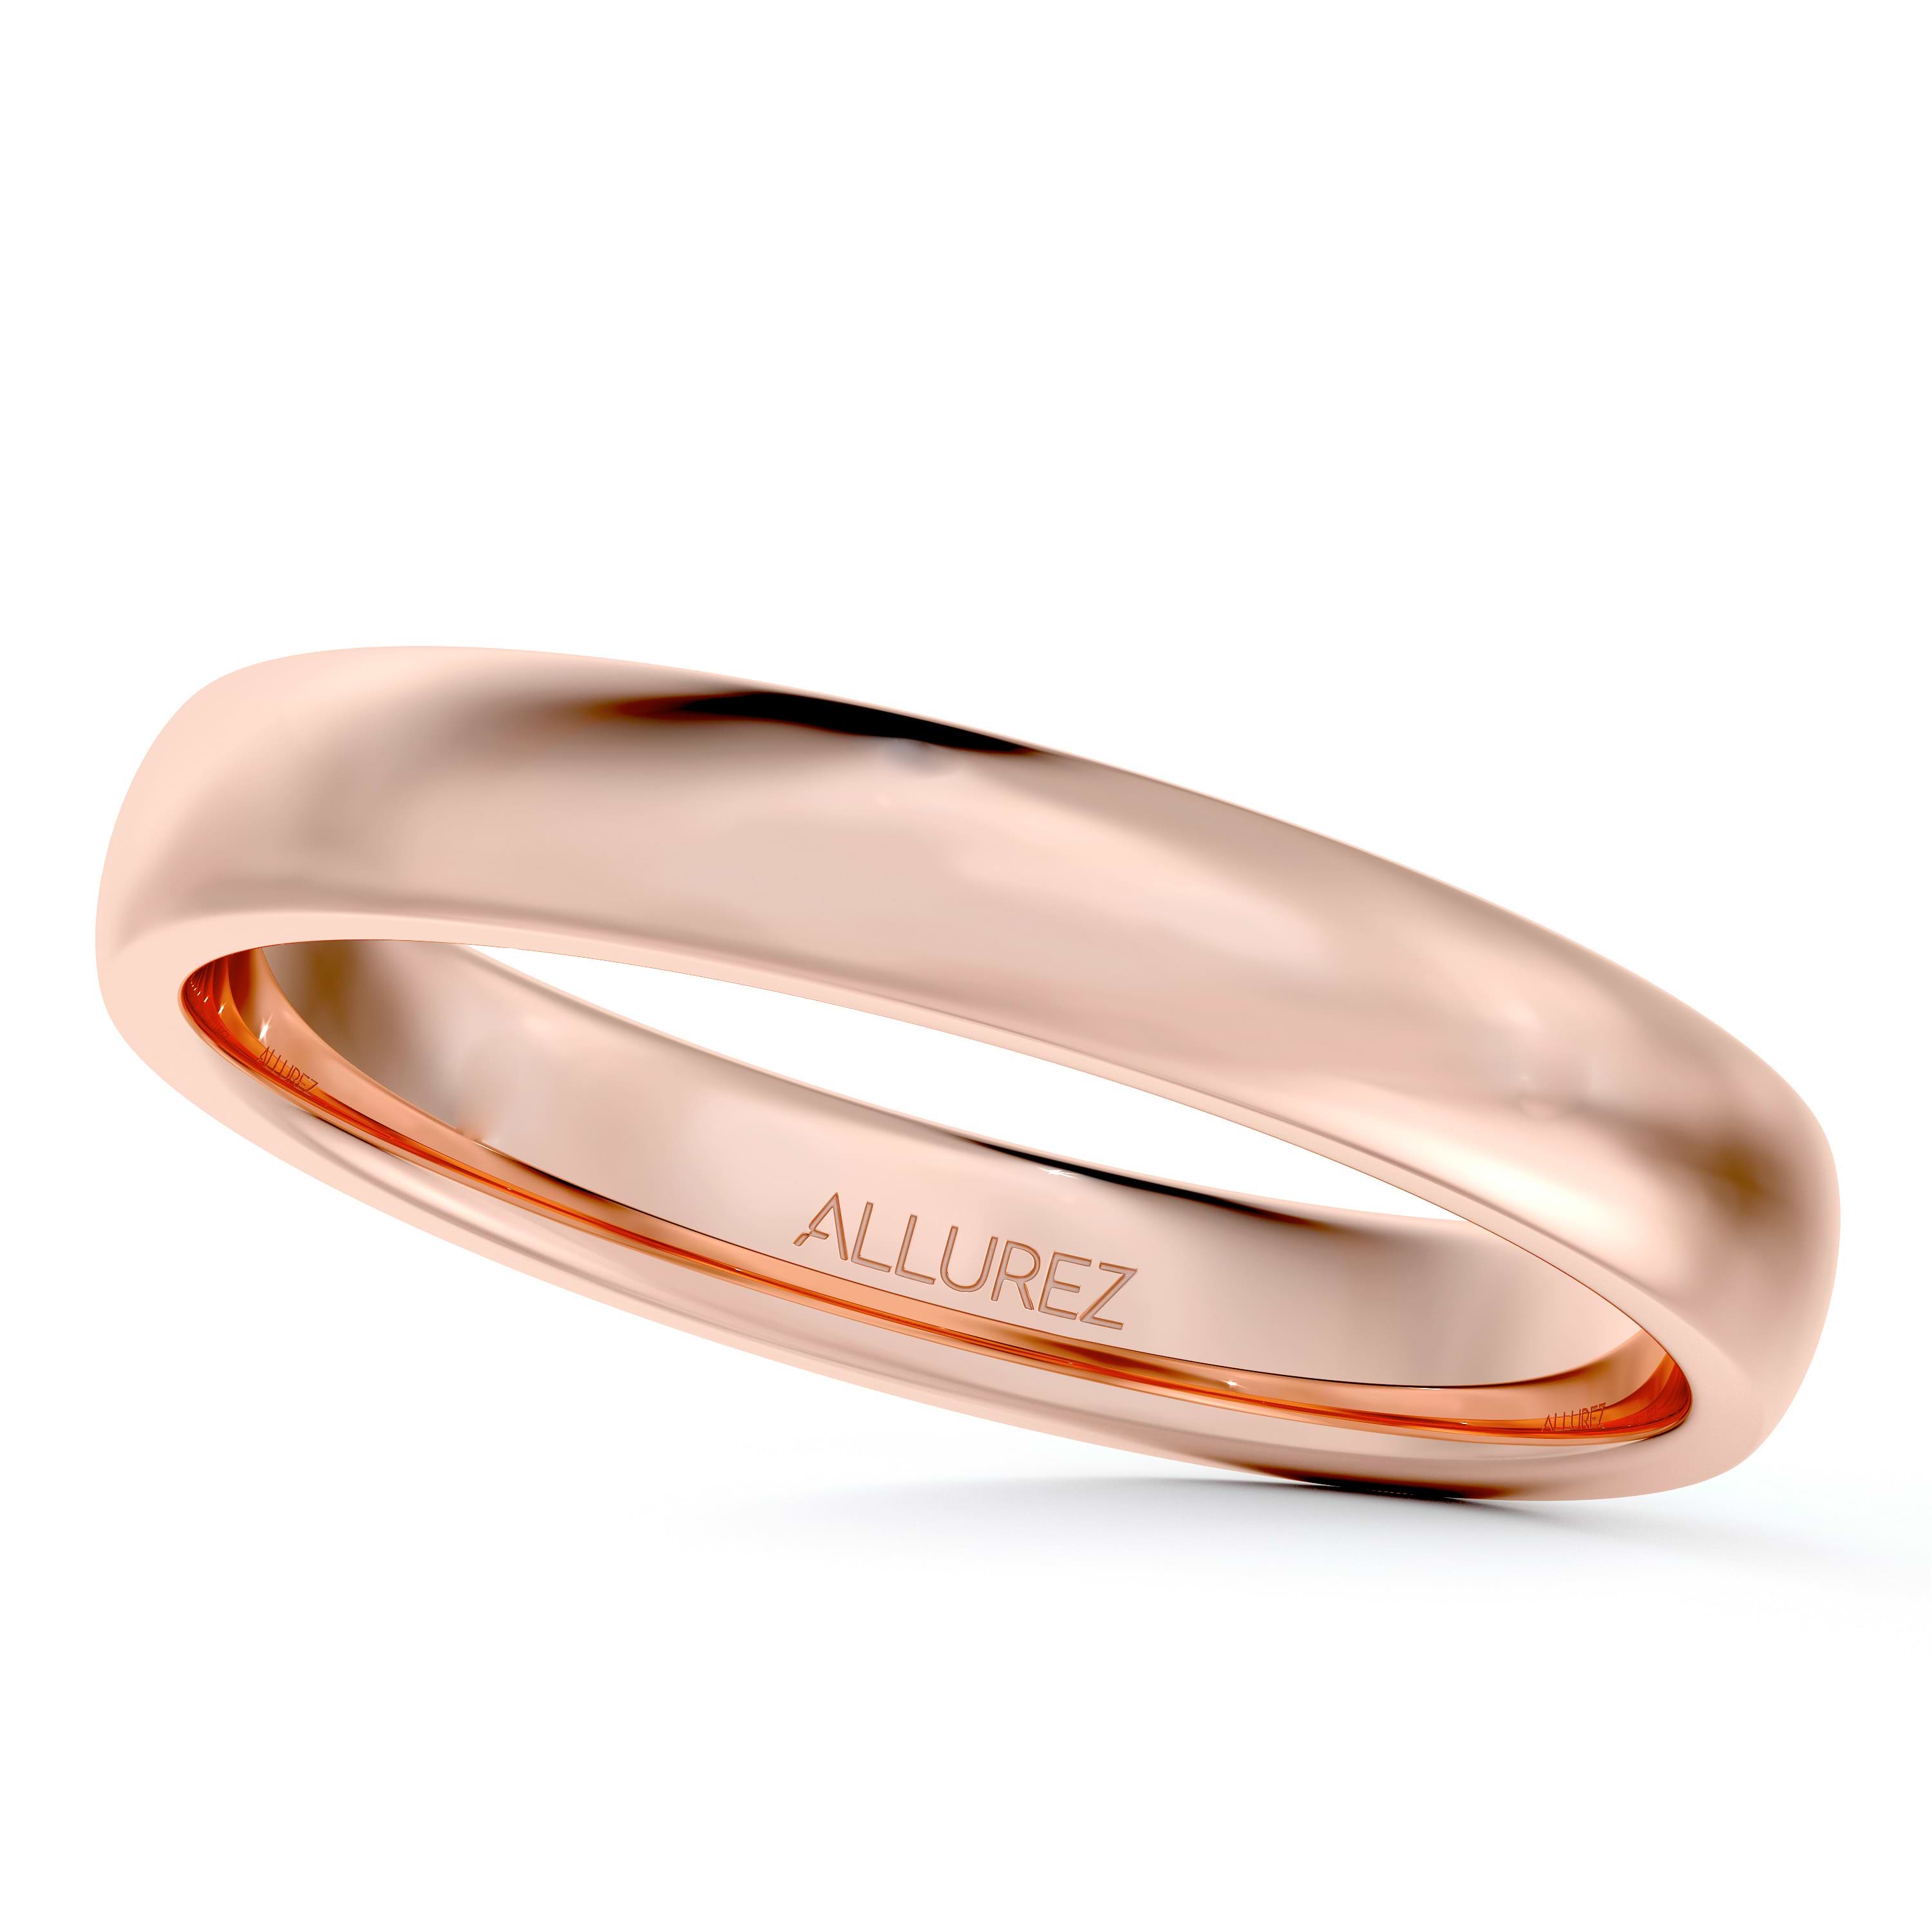 Dome Comfort Fit Wedding Ring Band 14k Rose Gold (3mm)